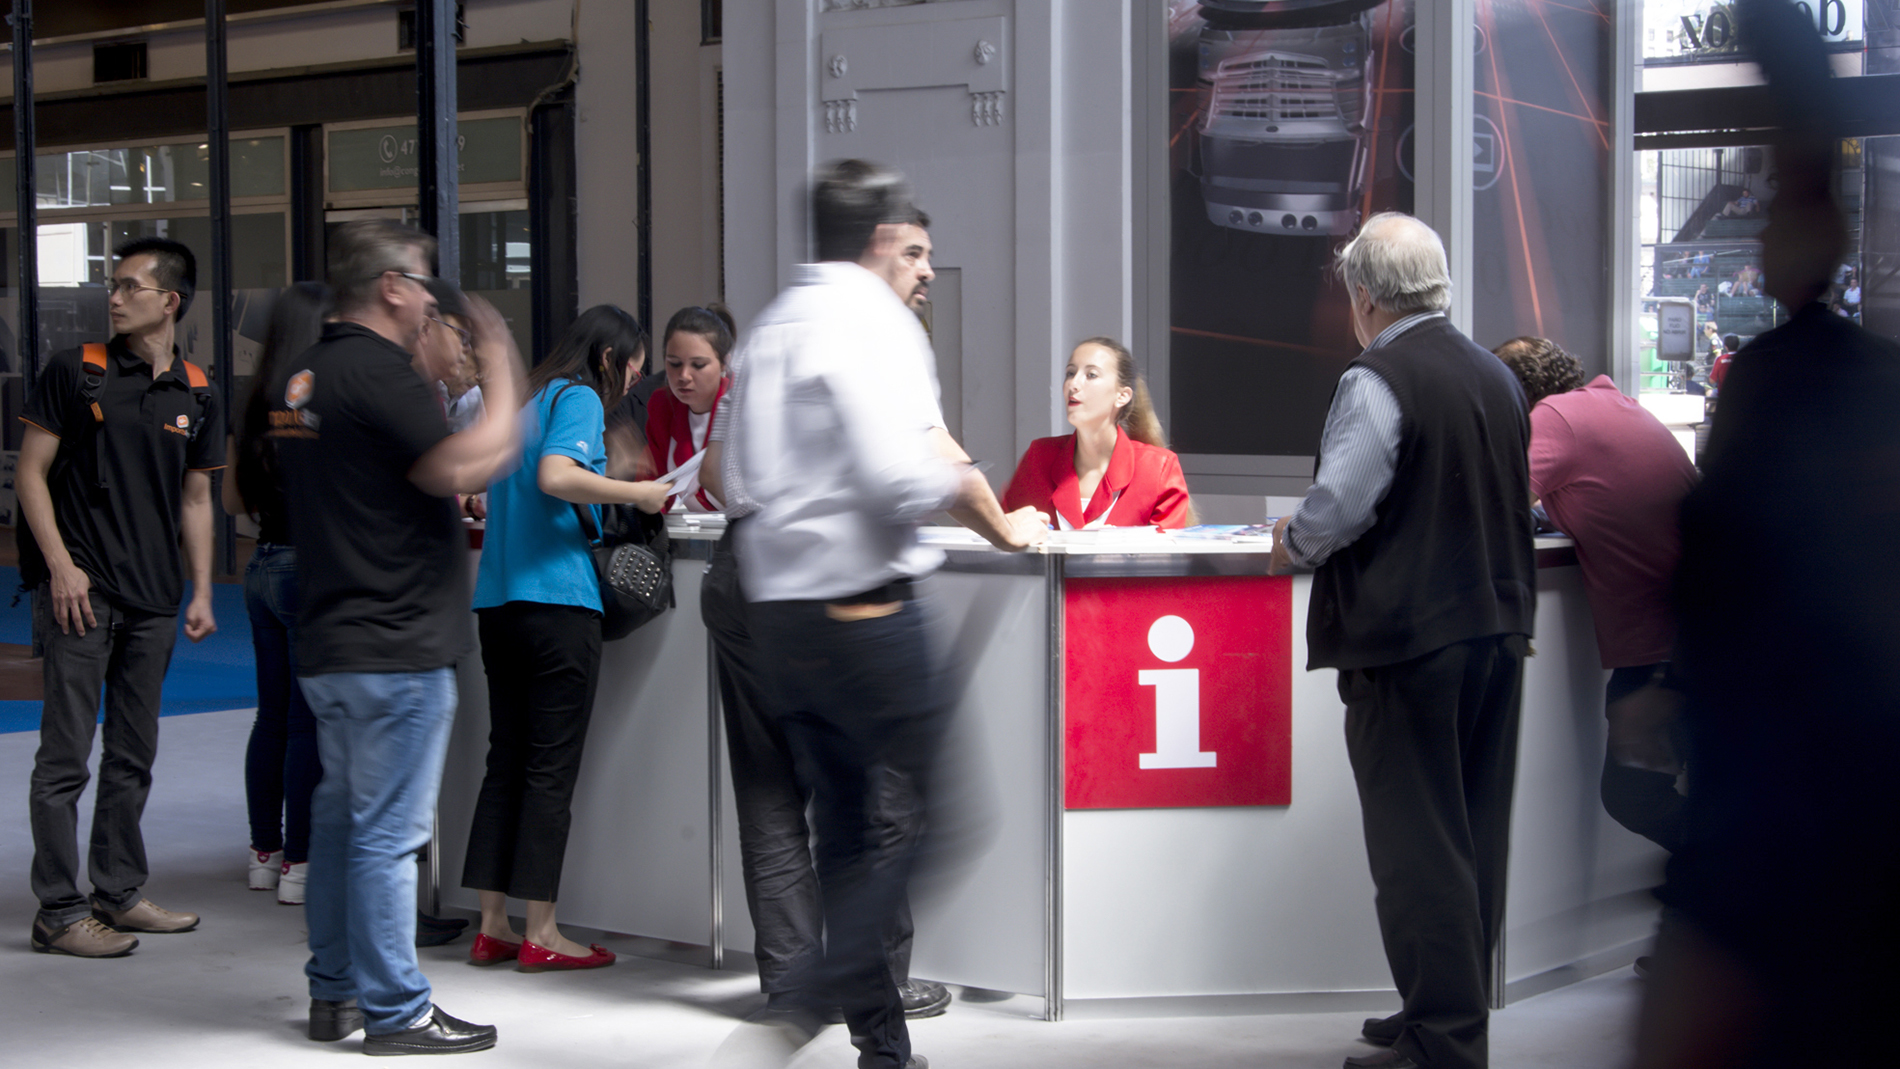 Automechanika Buenos Aires: Information booths